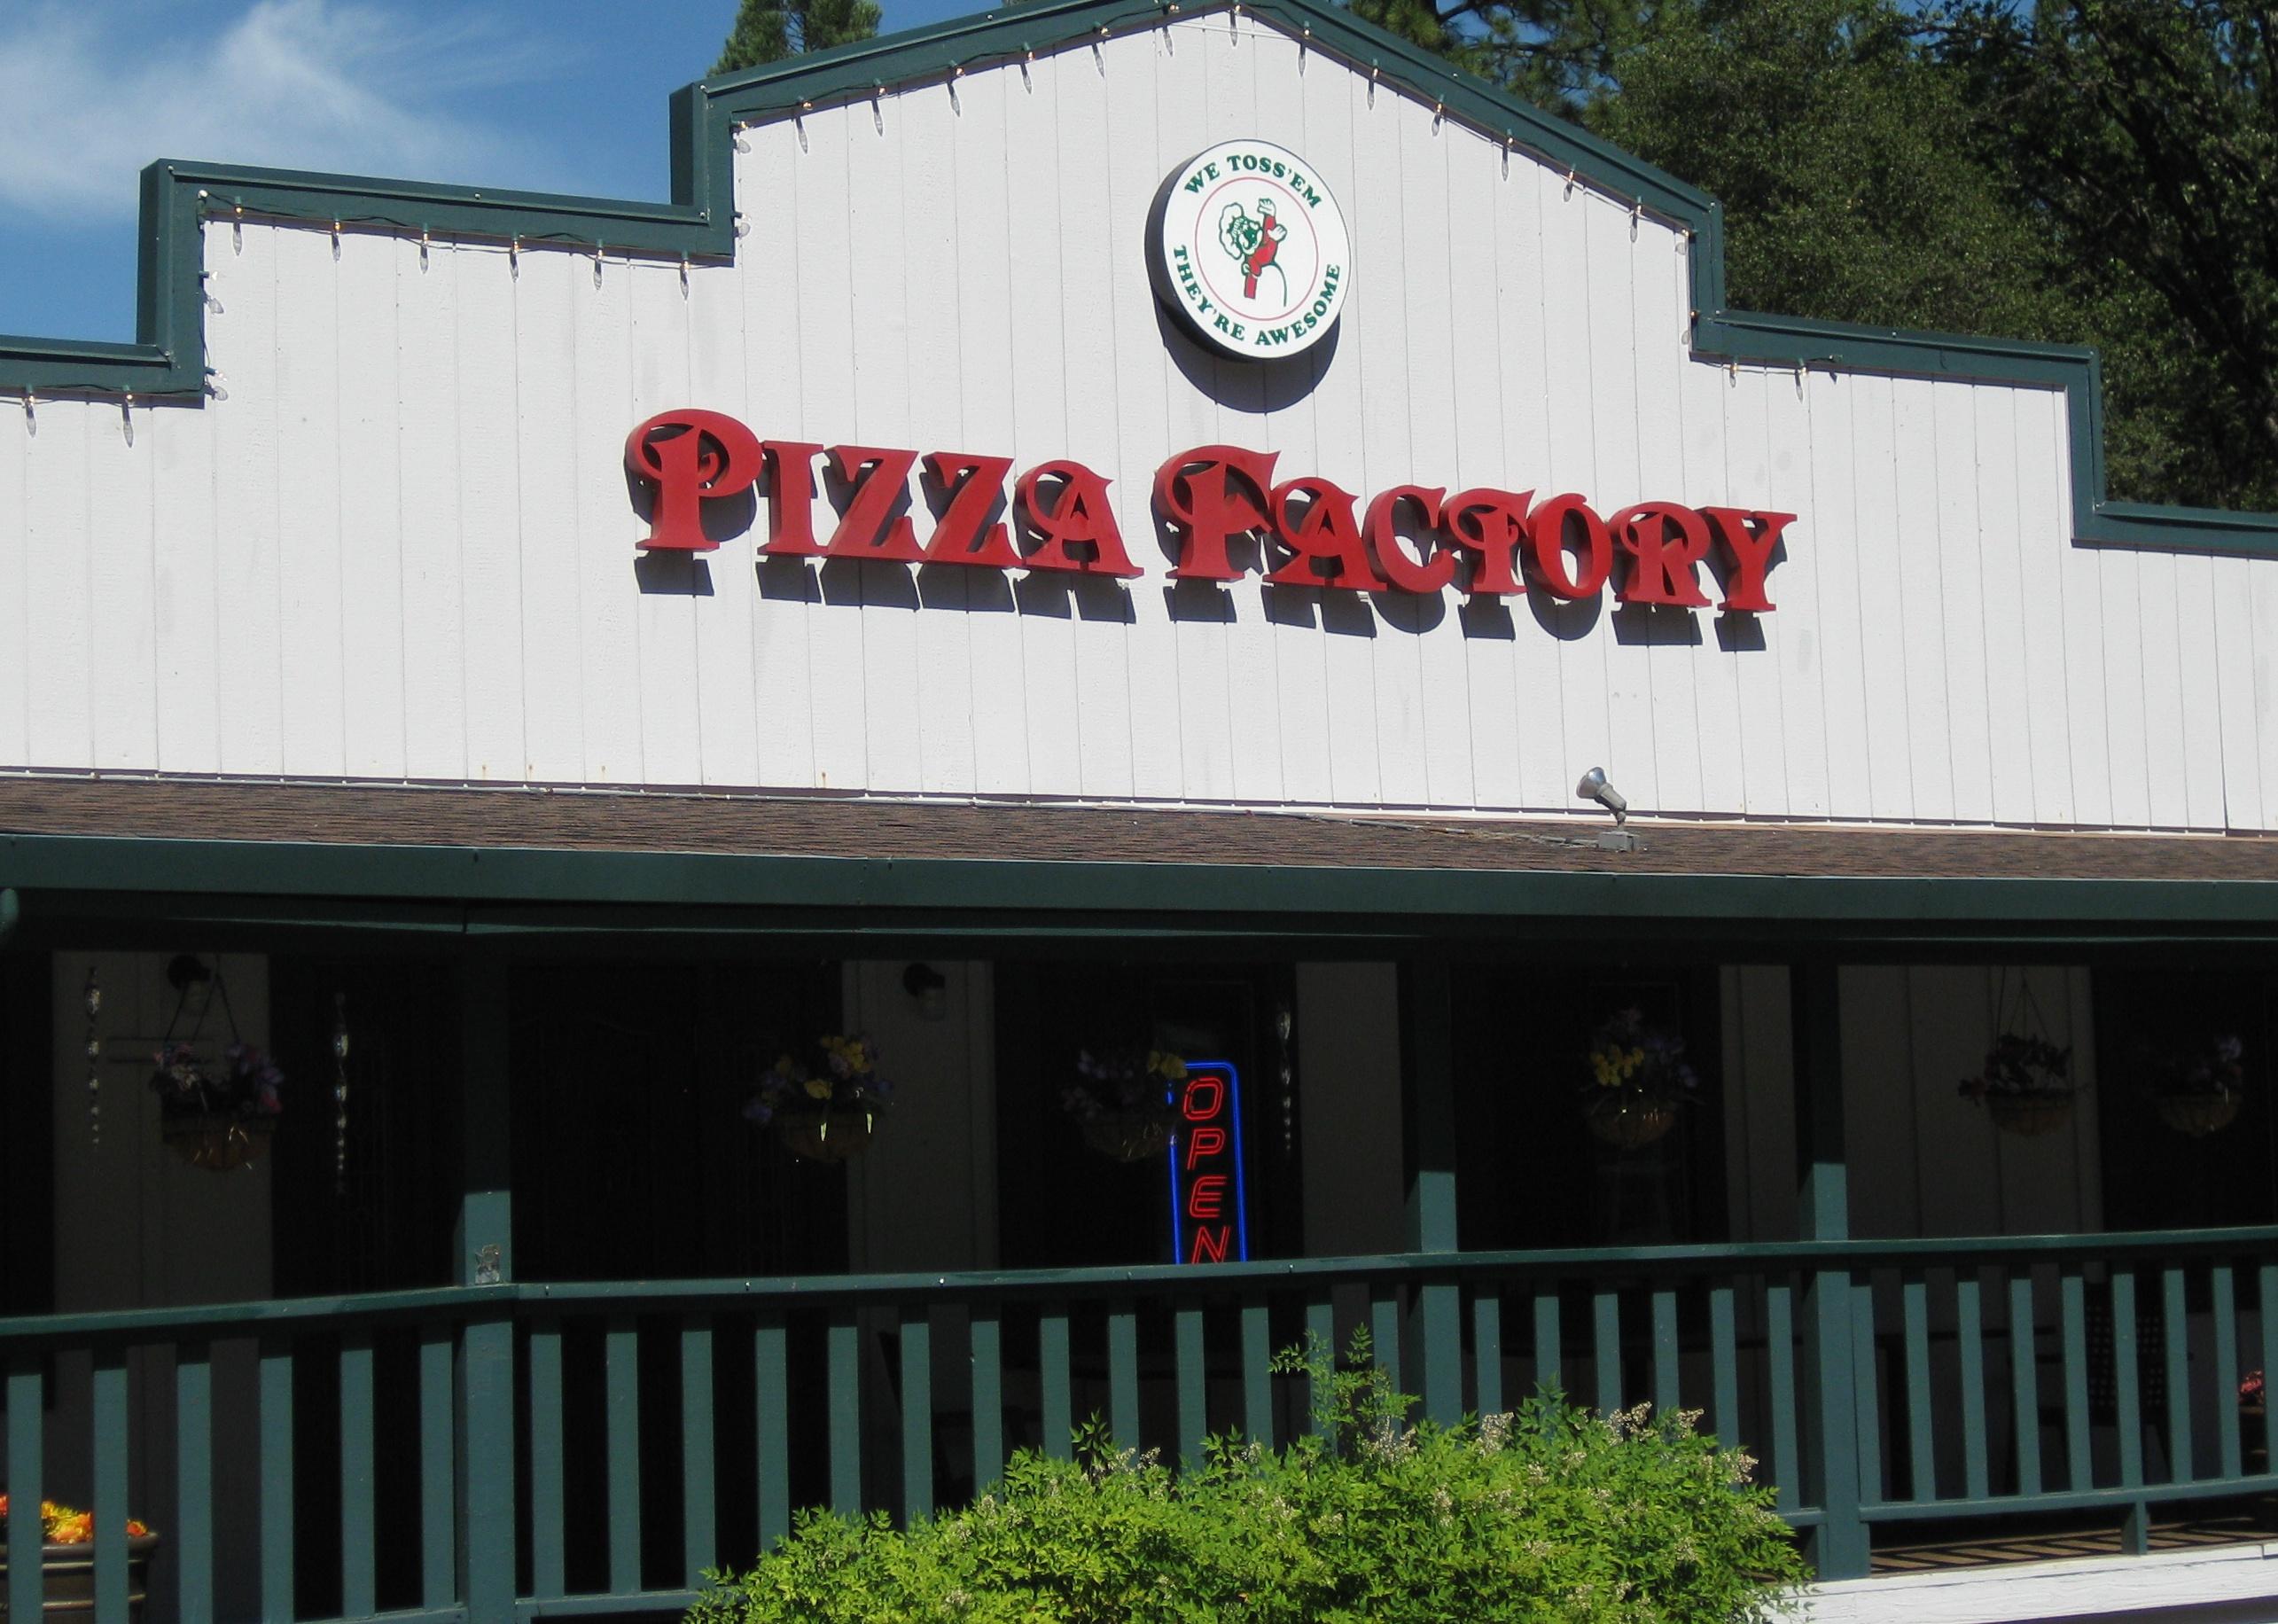 A green and white exterior location of Pizza Factory.